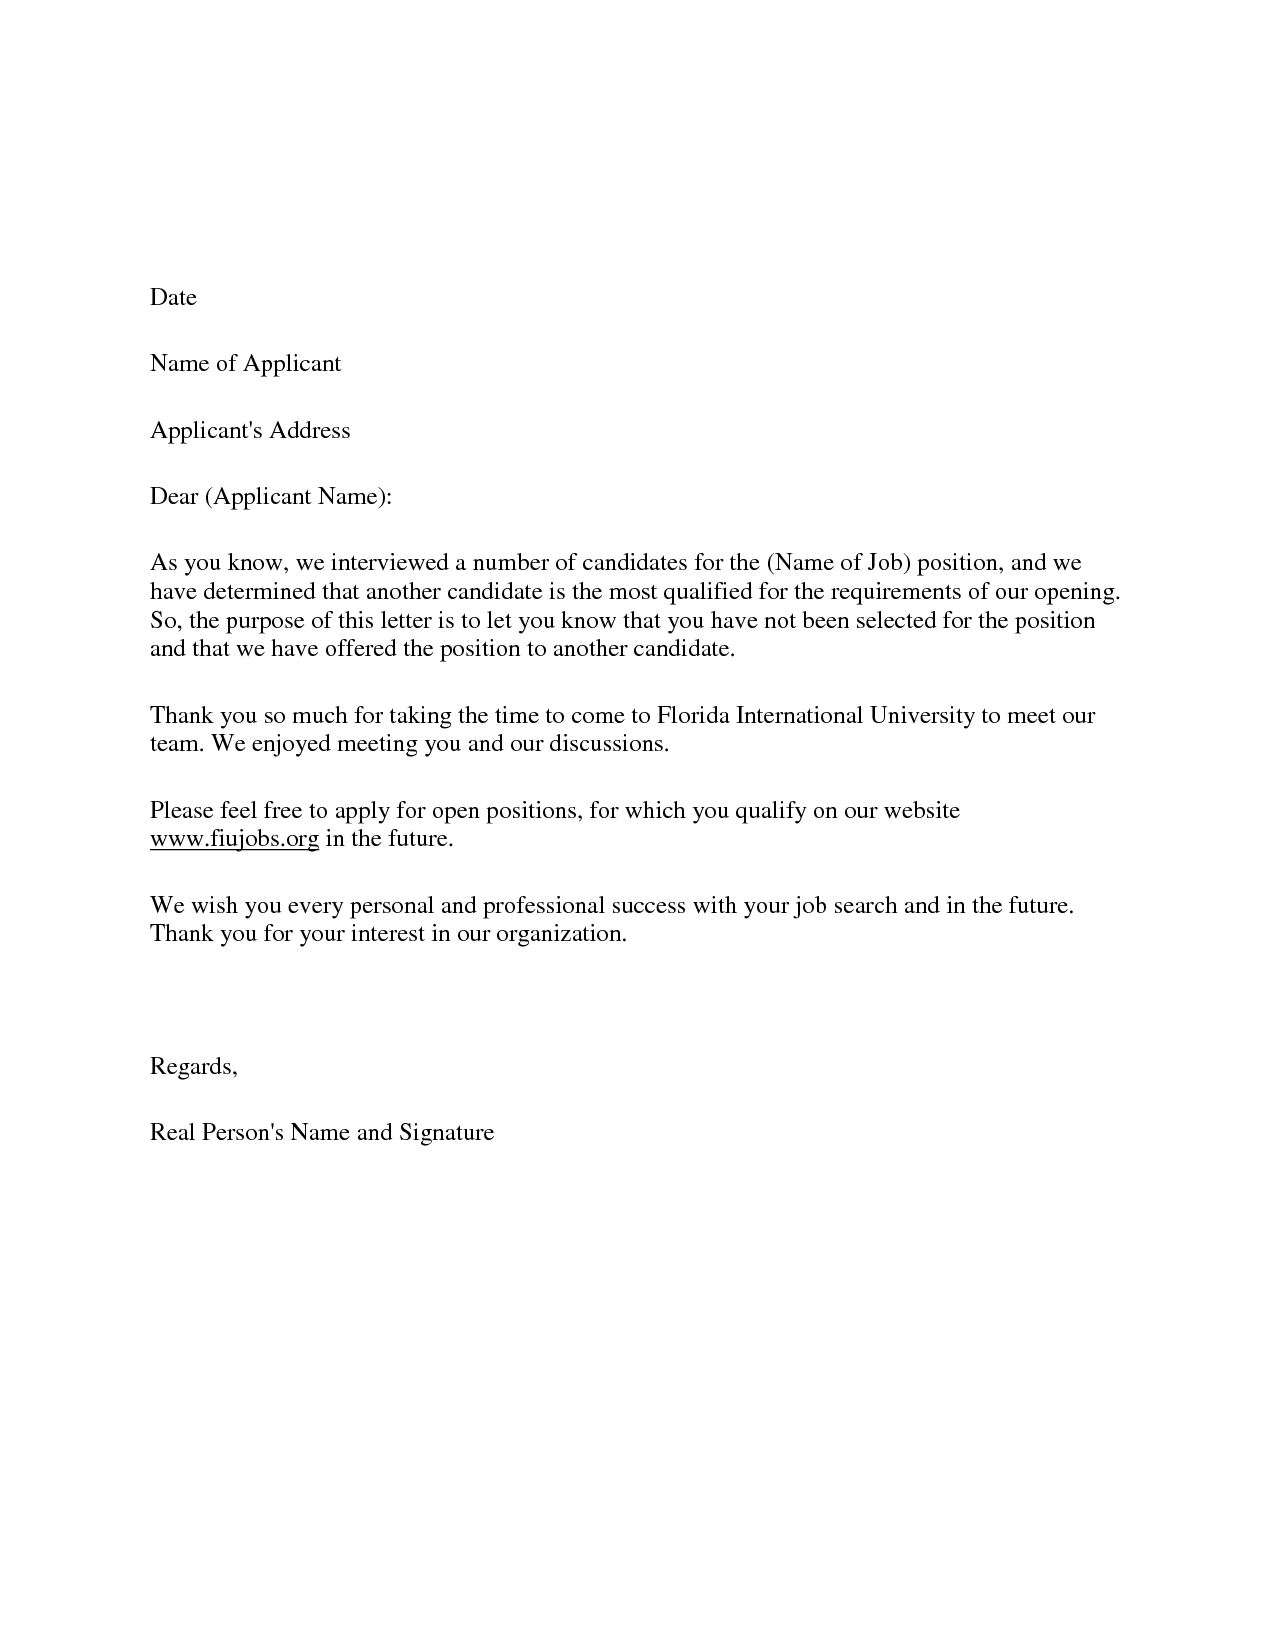 Employment Rejection Letter Template - Candidate Decline Letter Employers Of Choice Send Rejection